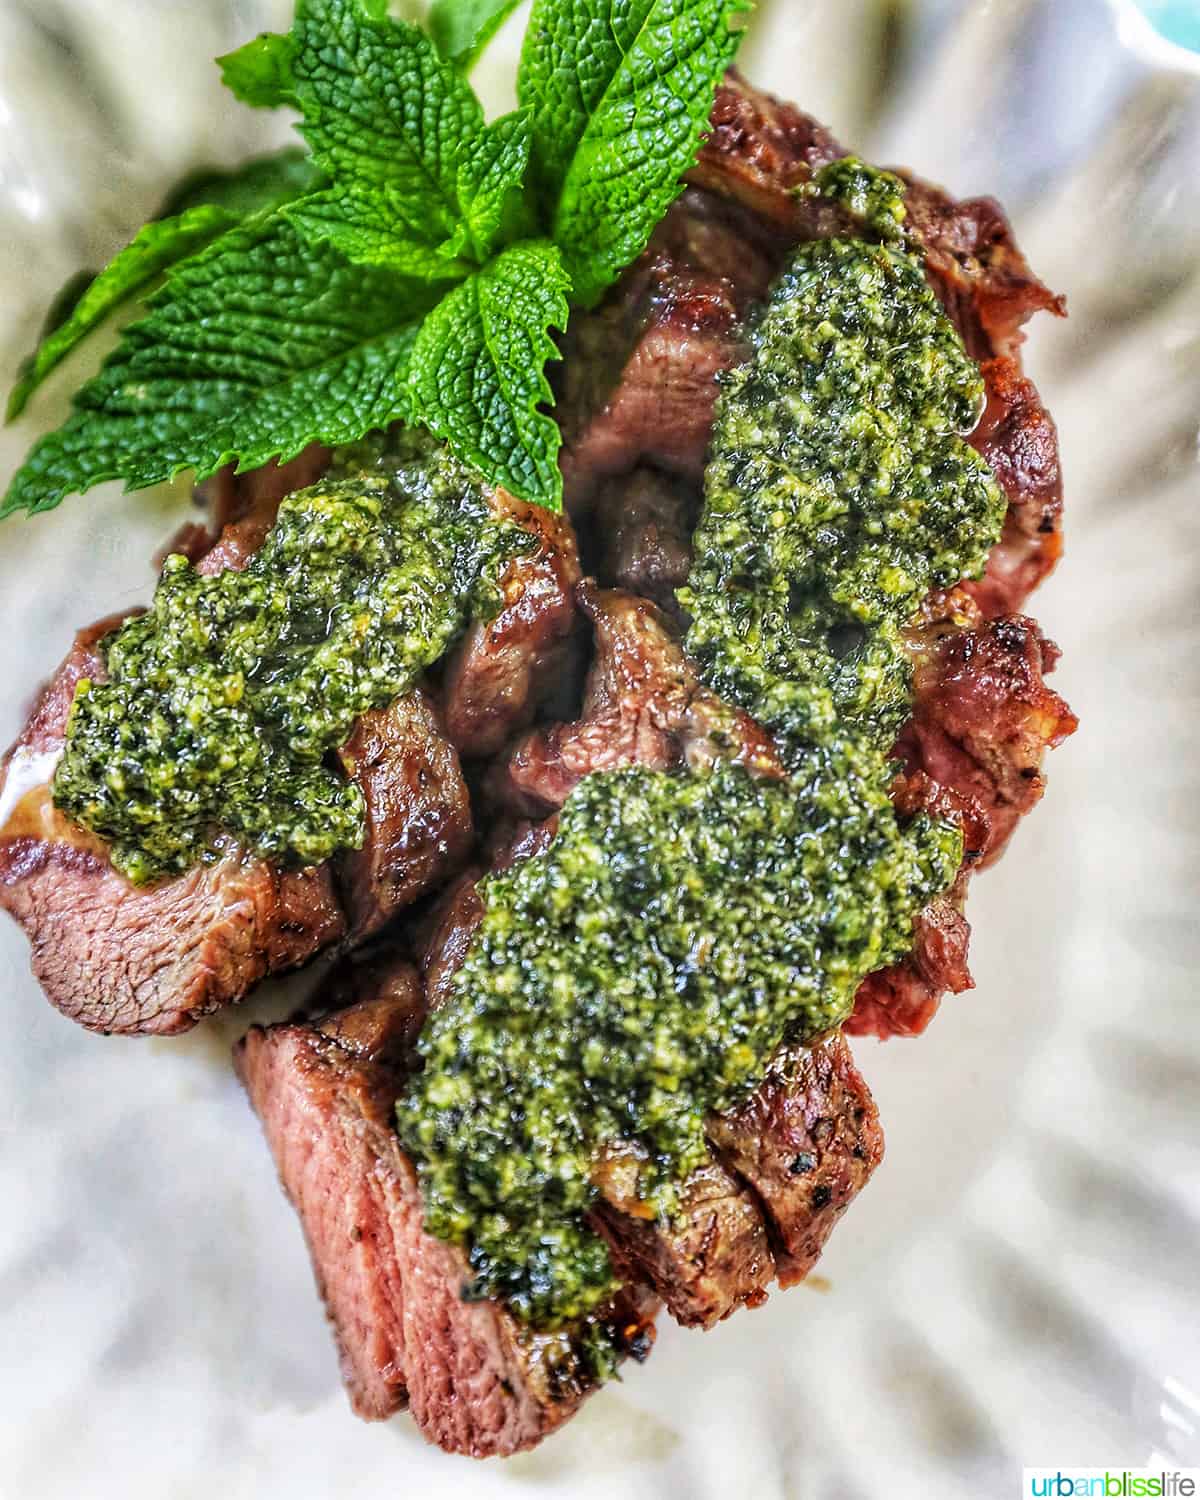 steak slices topped with mint pesto, with mint leaves as garnish on the top, on a white scalloped plate.